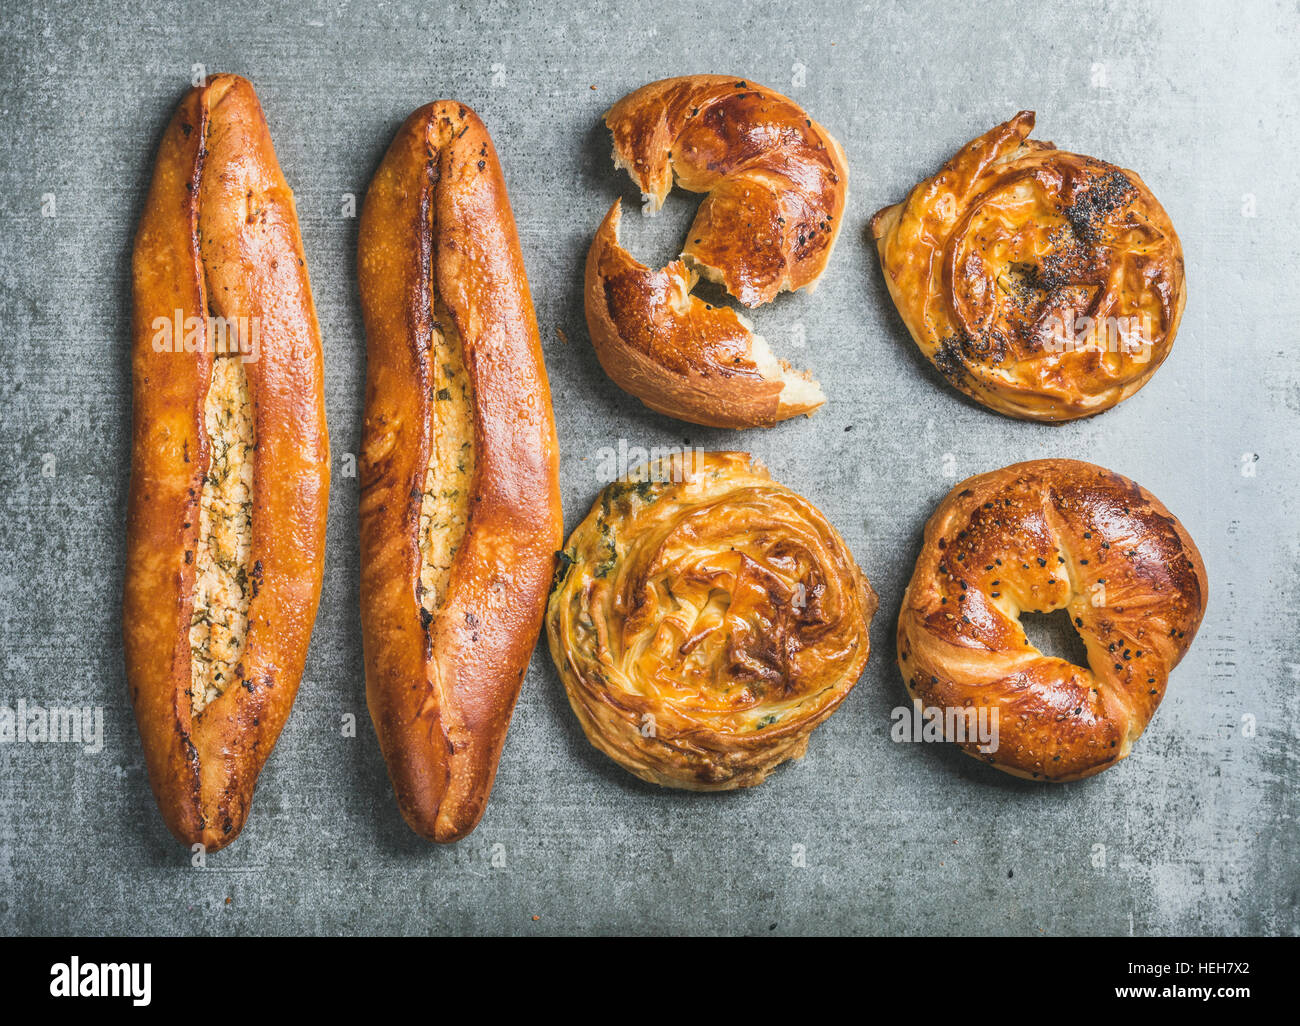 Oriental style Turkish pastry with different fillings over grey stone background, top view. Bagels with black sesame, borek with spinach and poppy see Stock Photo